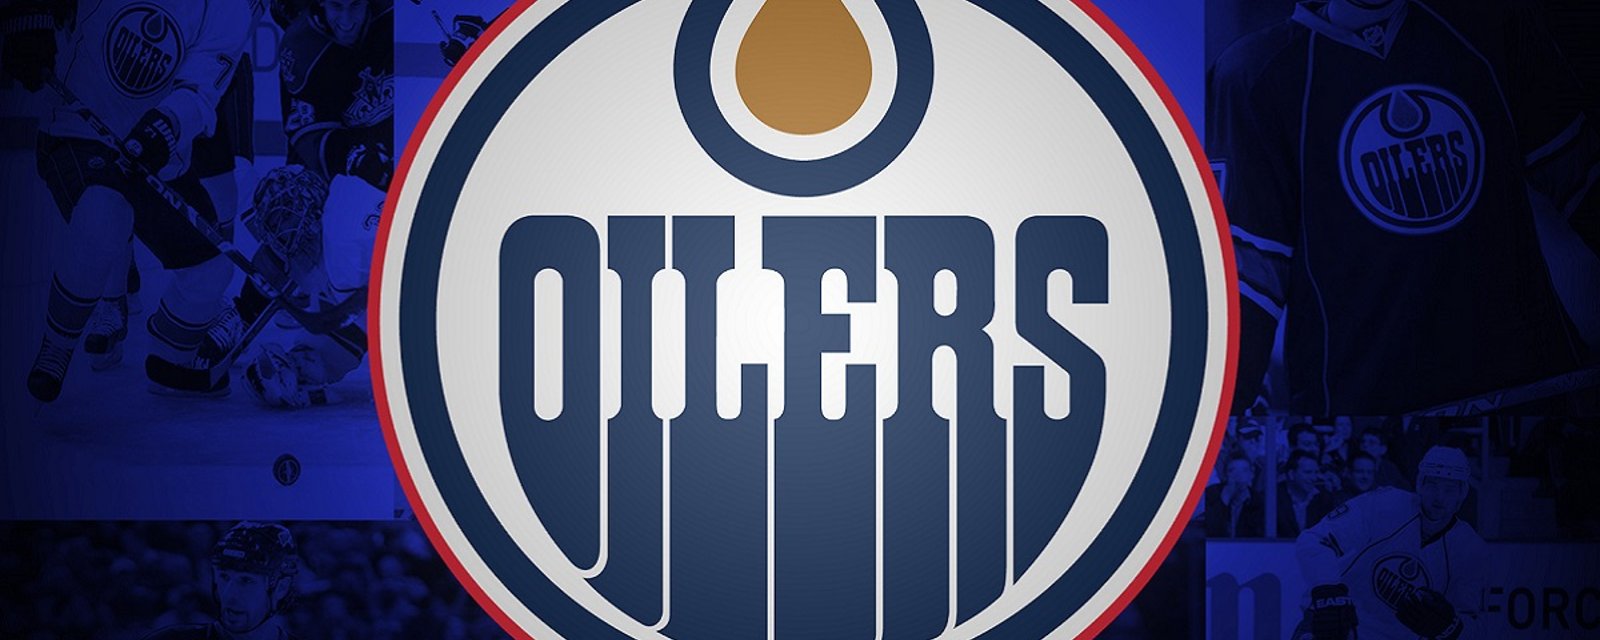 Another Oilers' trade is now officially a complete disaster.